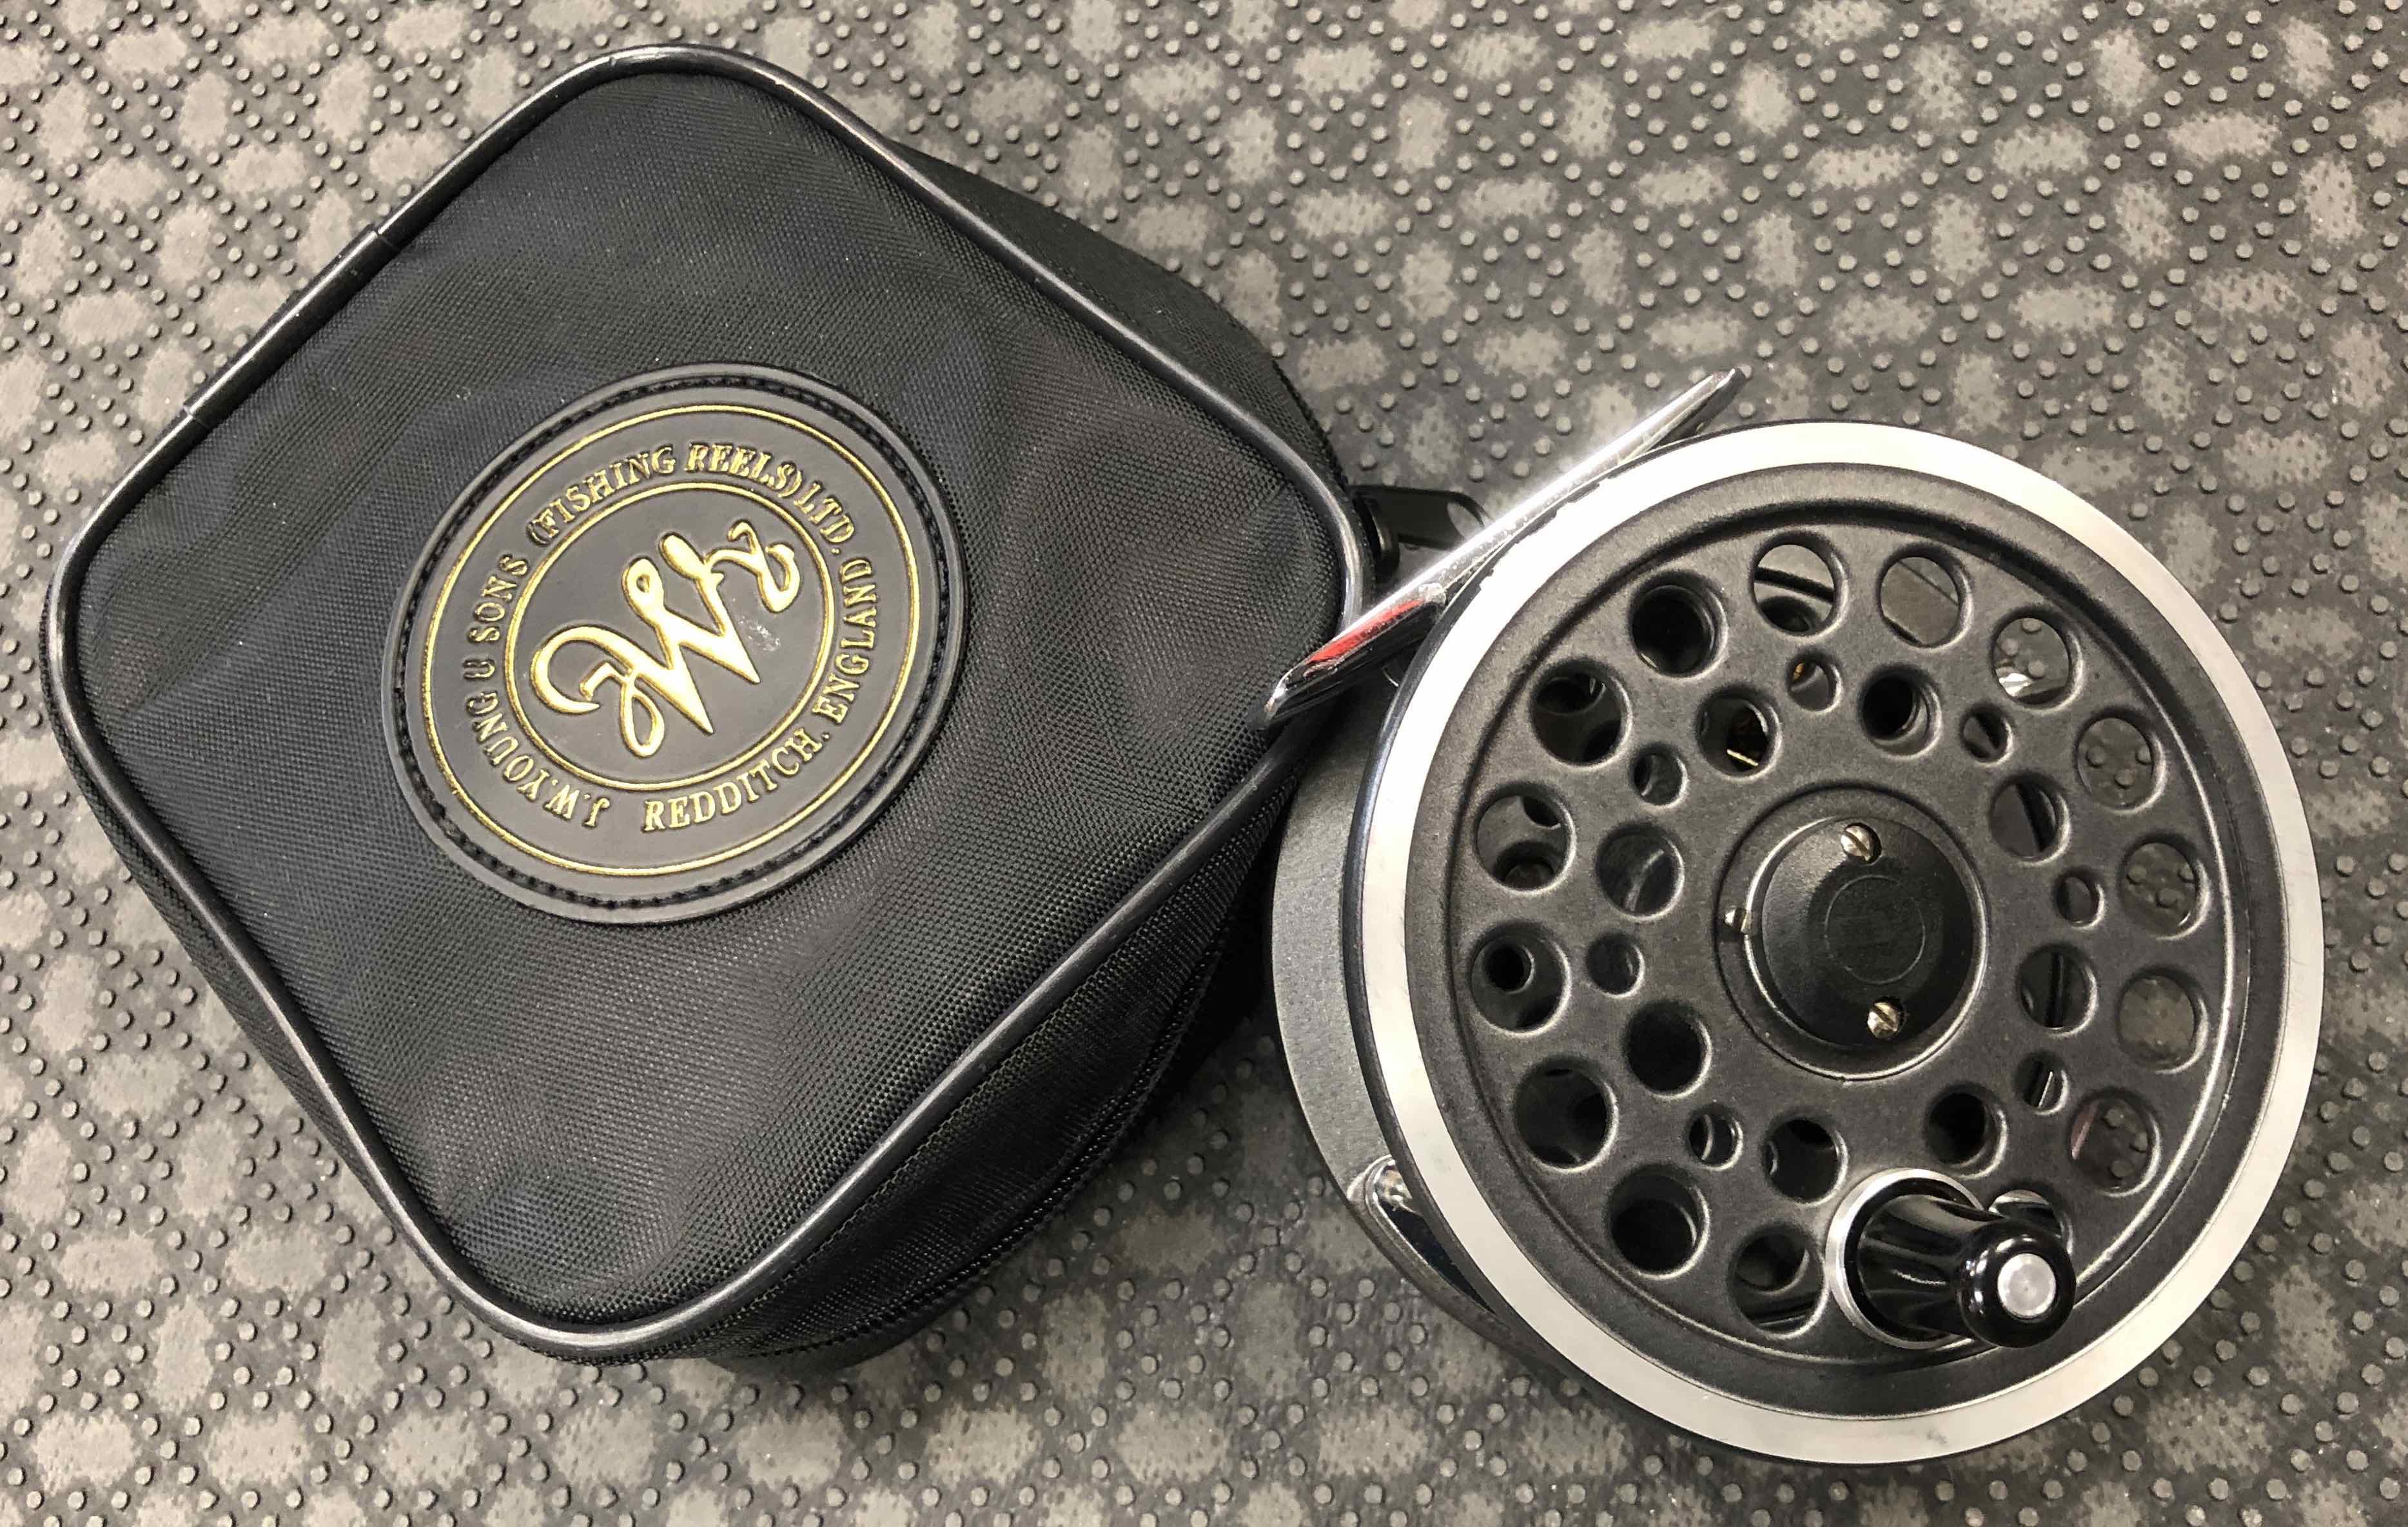 J.W. Young & Sons Ltd. Fly Reel - Redditch England - c/w Fly Line - 1540 Series - GREAT SHAPE! - $110